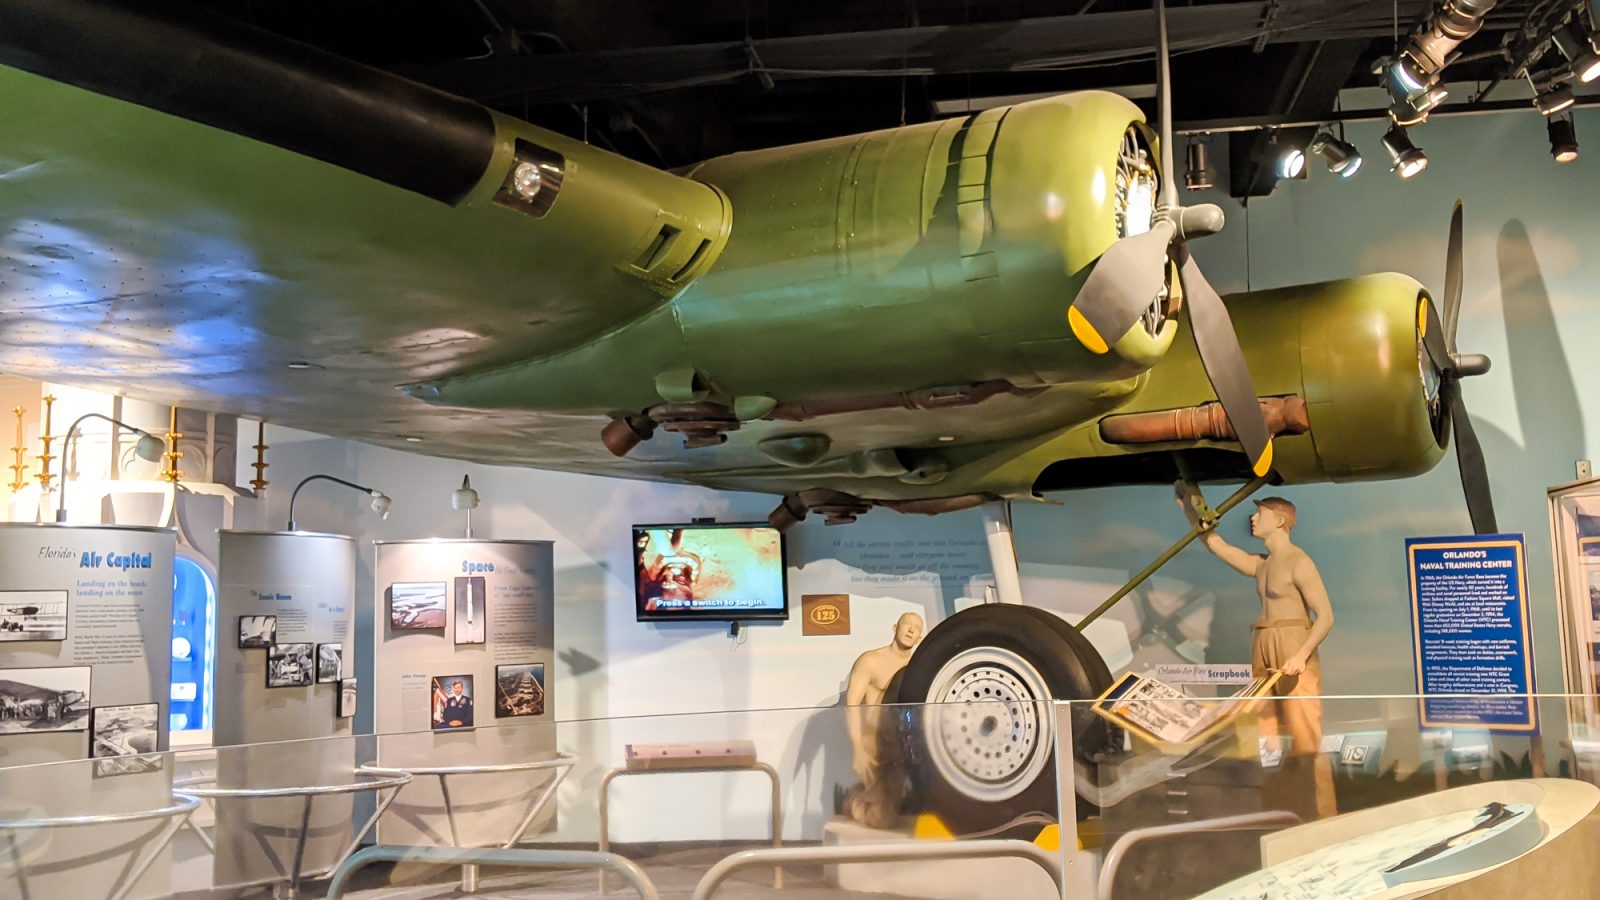 WWII sites in Orlando, Florida / WWII museums and memorials near Orlando and central Florida / World War II history